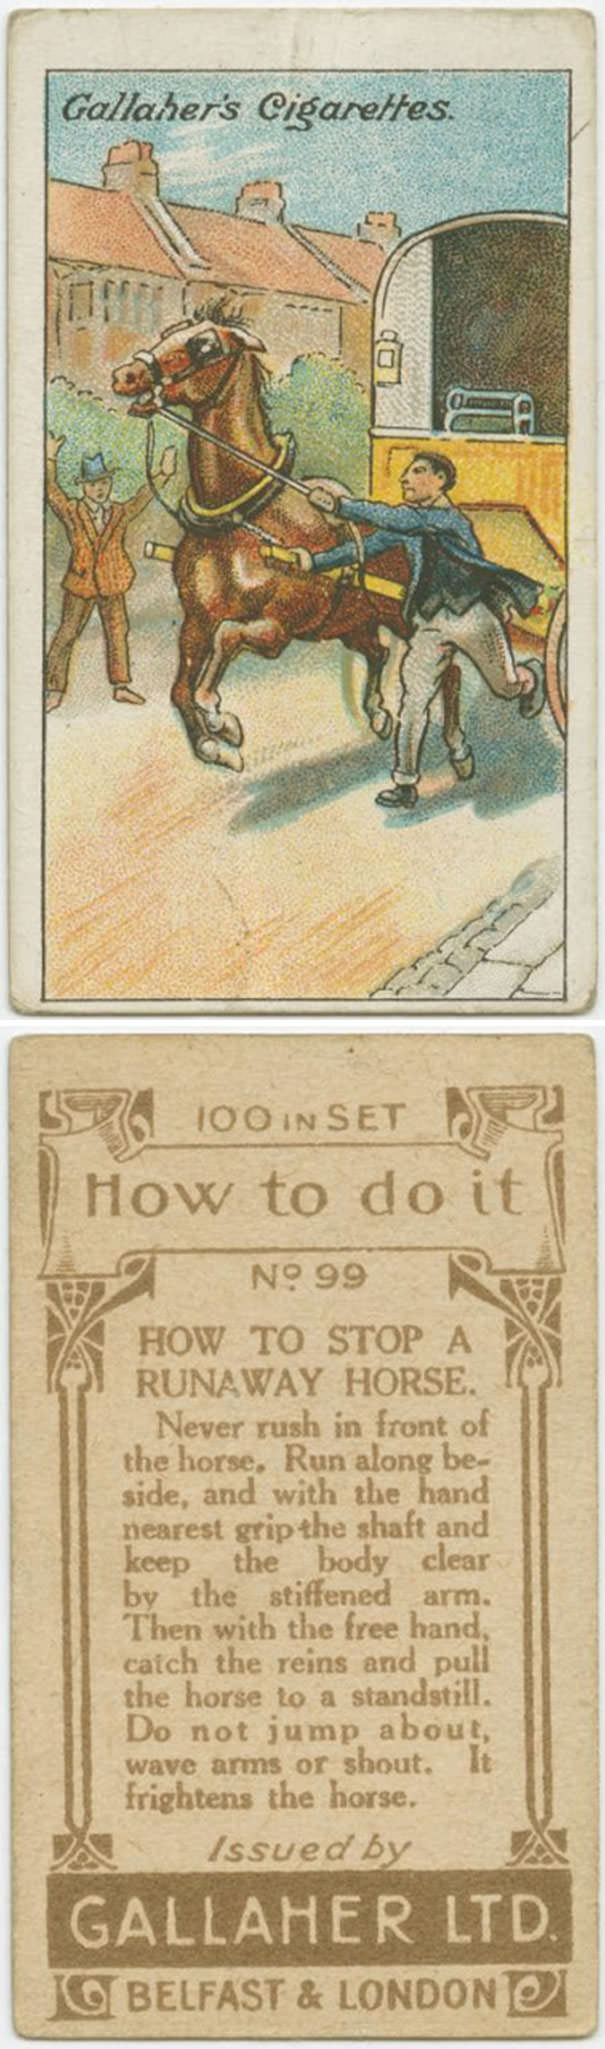 50+ Useful Everyday Life Hacks From 1900s That Are Still Useful Today